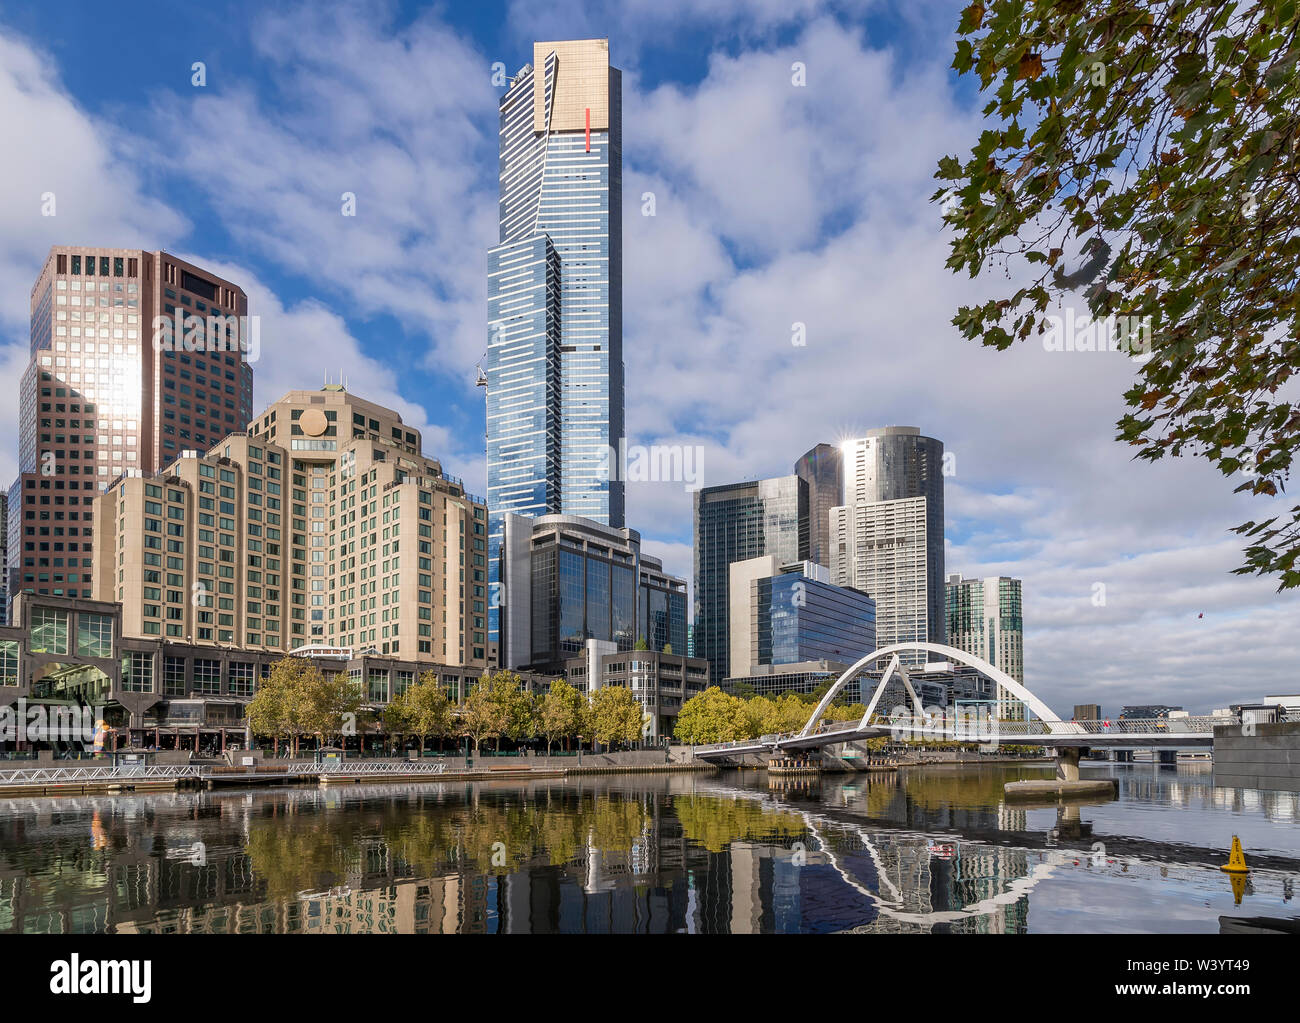 Beautiful view of the city center of Melbourne, Australia, with the Evan Walker Bridge reflected in the waters of the Yarra River Stock Photo